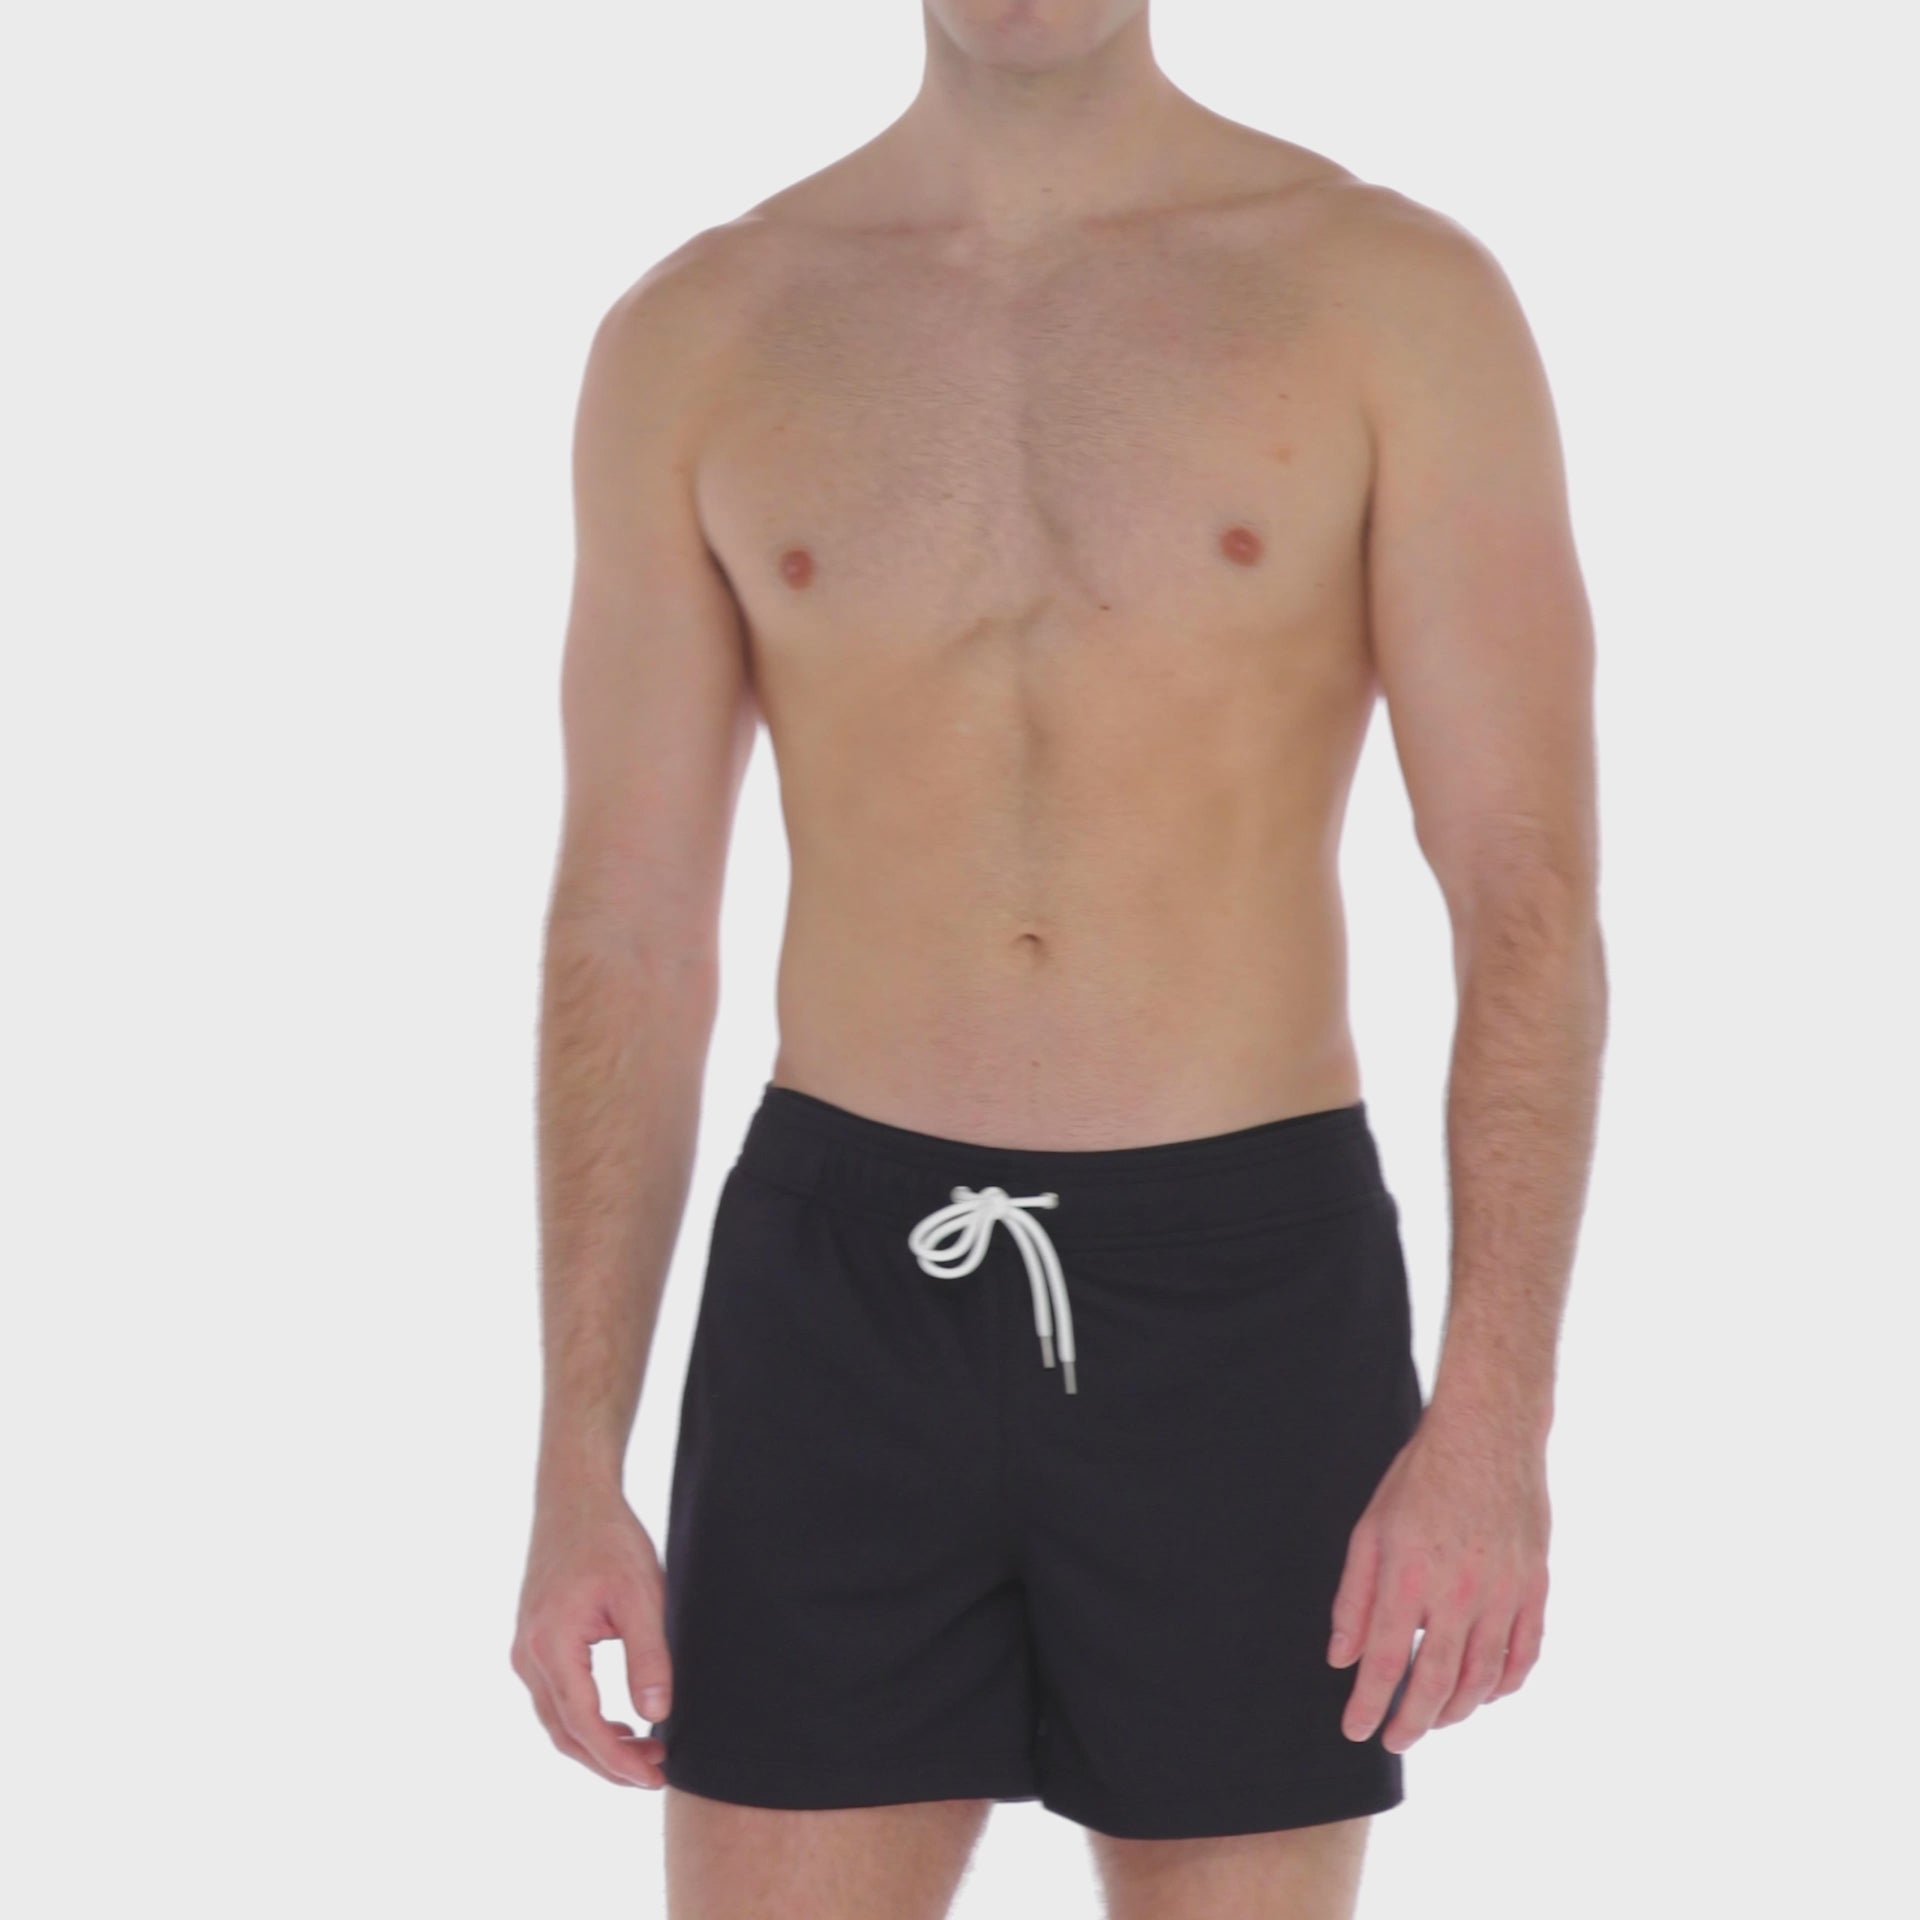 Men's Black Sweat Short by SAMMY Menswear, an LGBTQ-Owned, Sustainable, American Brand